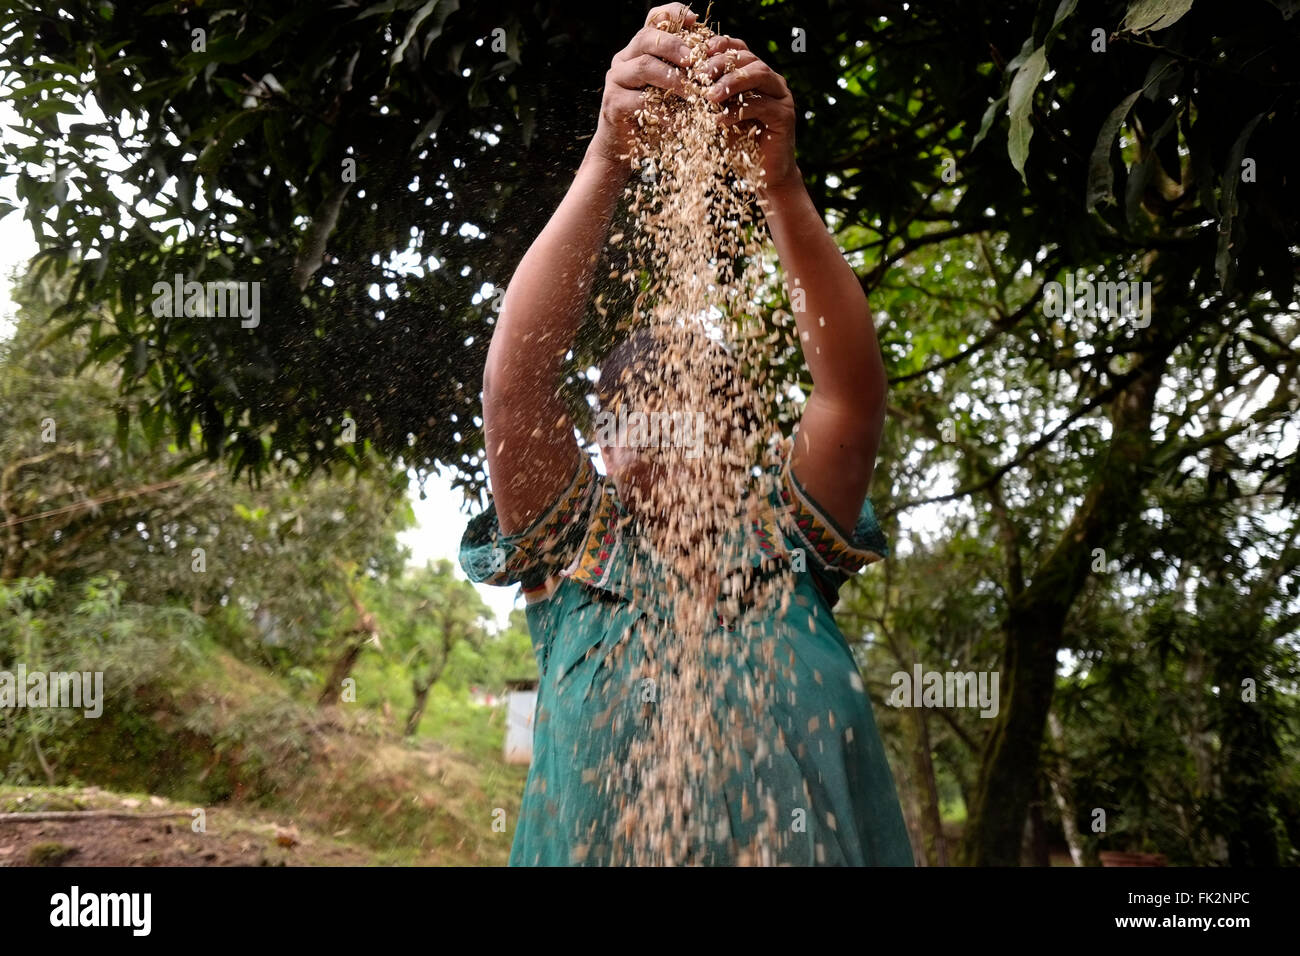 Indigenous woman of the Ngabe & Bugle native ethnic group sorts seeds in Comarca Quebrado region, Guabo reservation in Chiriqui province Republic of Panama Stock Photo